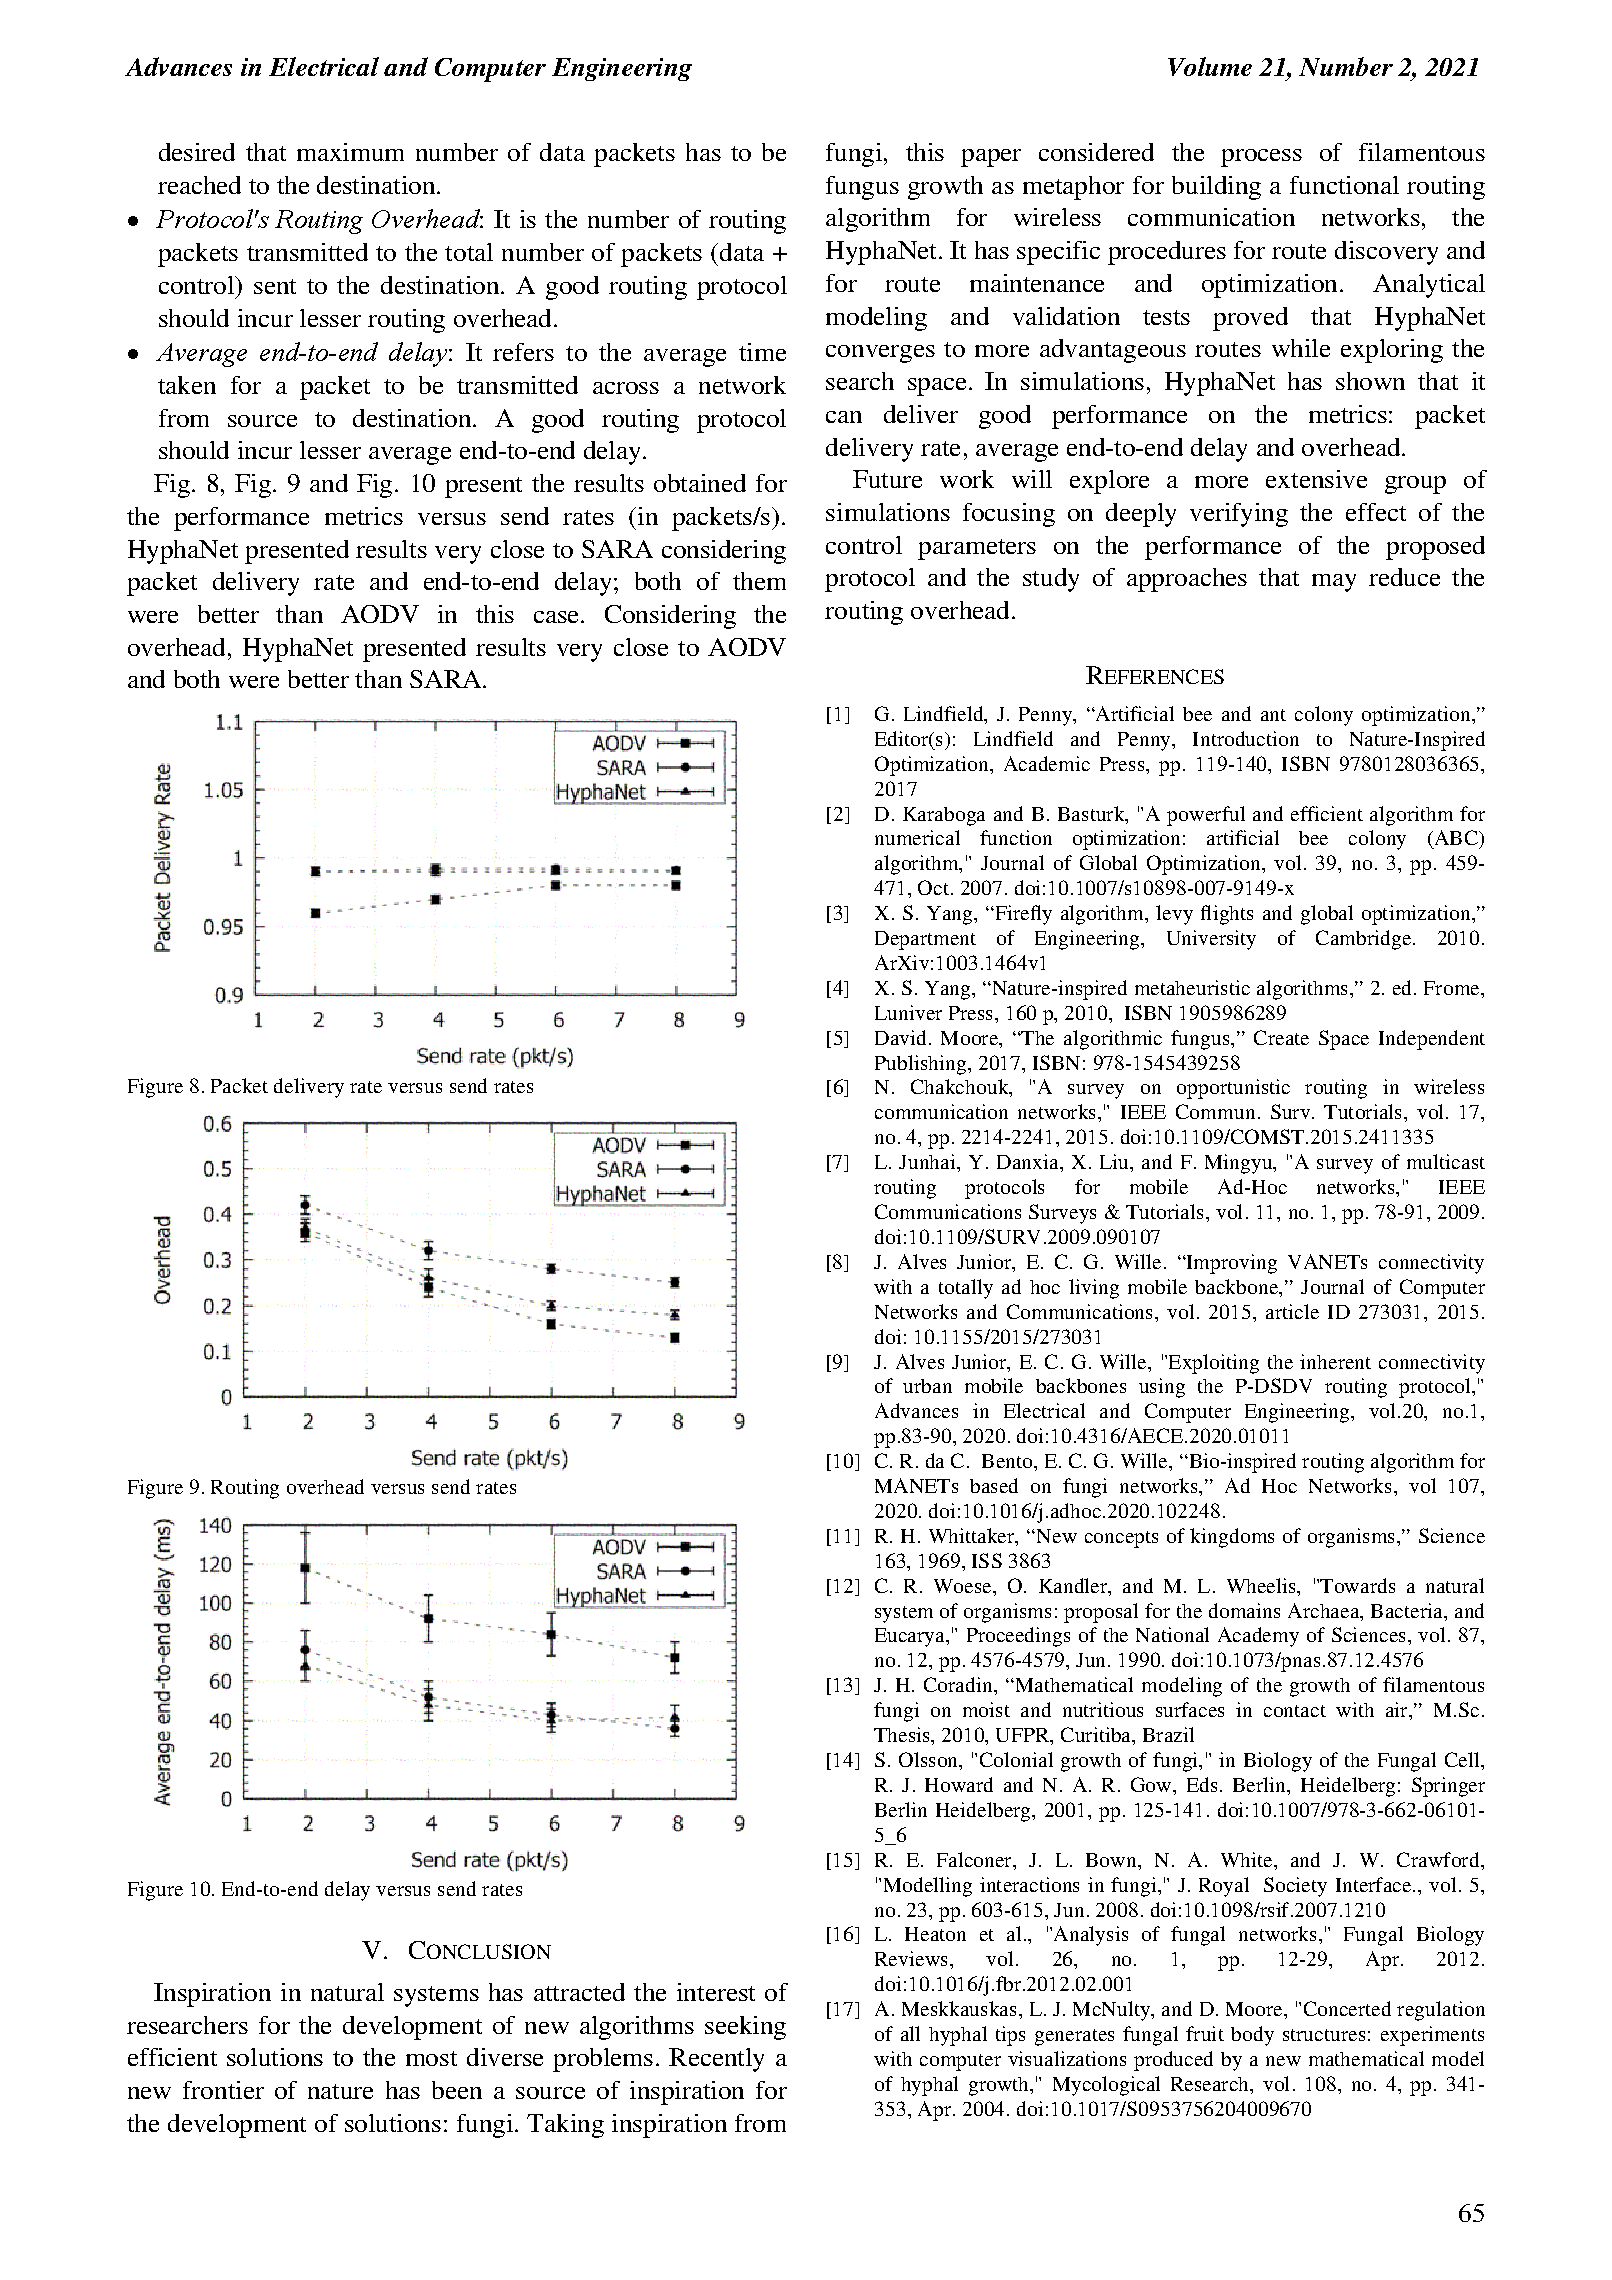 PDF Quickview for paper with DOI:10.4316/AECE.2021.02007